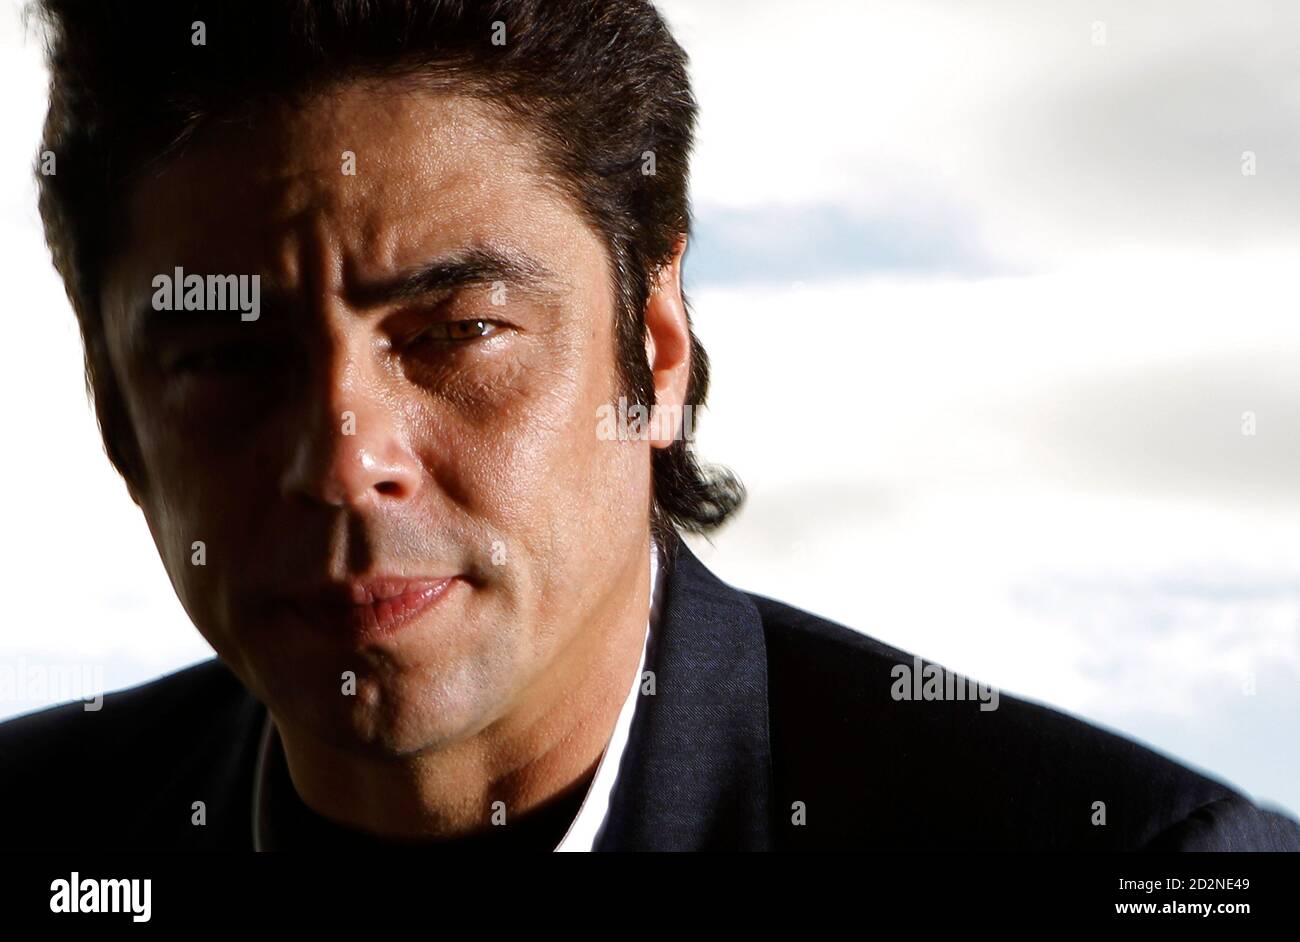 Actor Benicio Del Toro, who stars in the movie "The Wolfman," poses for a  portrait in Los Angeles February 6, 2010. Del Toro, who won an Oscar  playing a tough cop in